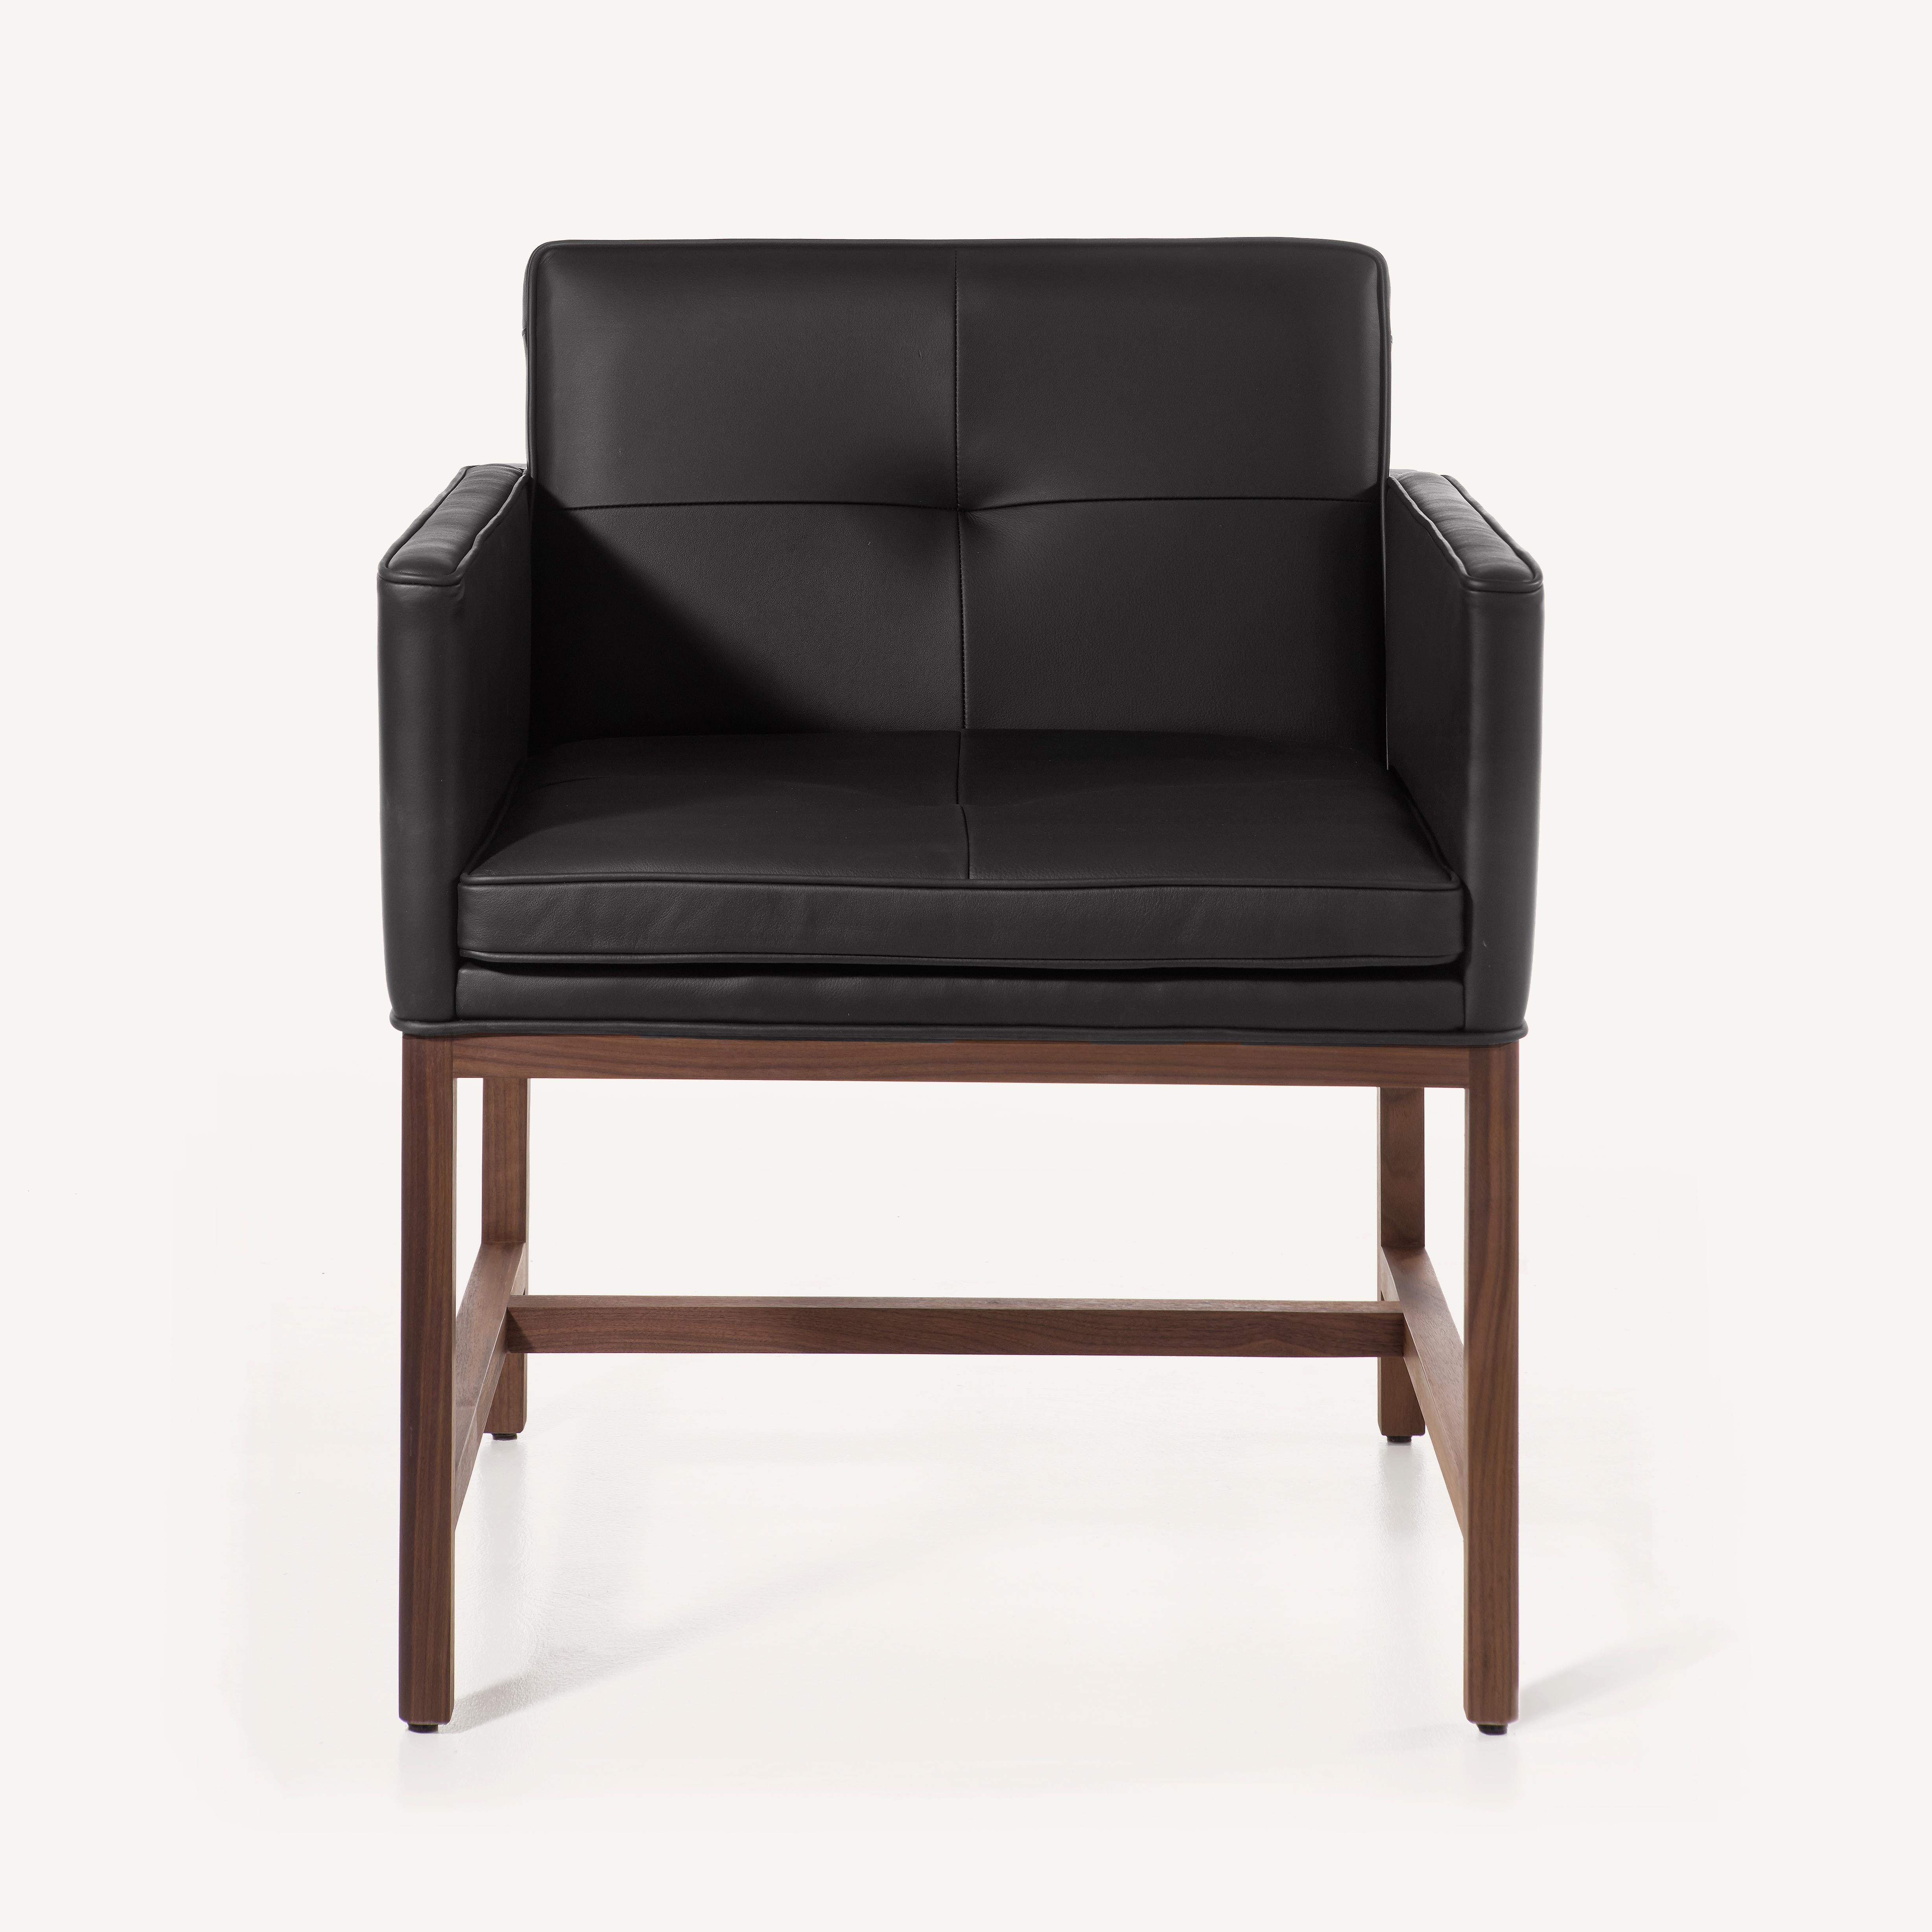 For Sale: Black (Comfort 99991 Black) Wood Frame Armchair in Solid Walnut and Leather Designed by Craig Bassam 3